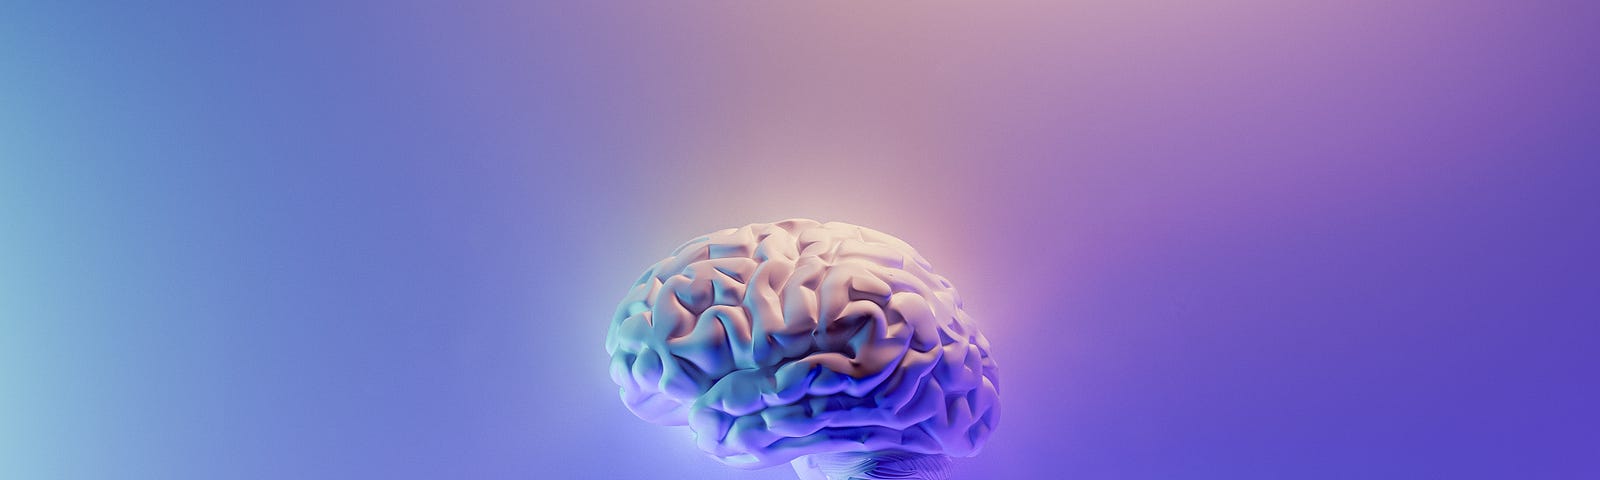 An illustration of the brain (side view) floating against a purple background. The dominant Alzheimer’s hypothesis: a brain protein subtype (beta-amyloid) causes Alzheimer’s disease.